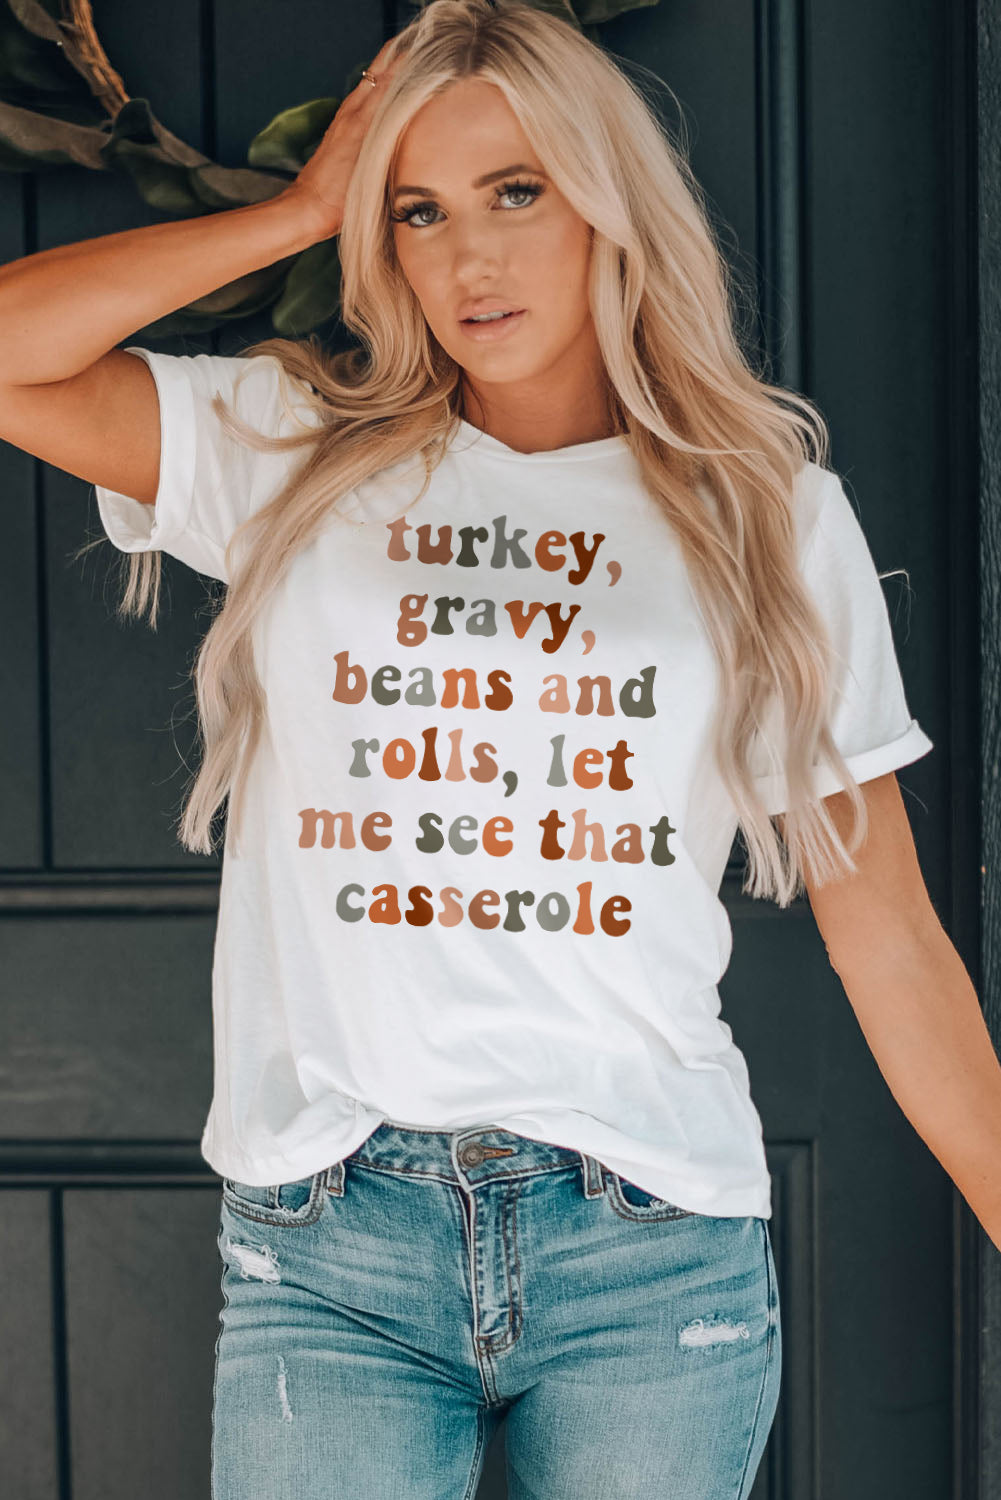 LC25218932-1-S, LC25218932-1-M, LC25218932-1-L, LC25218932-1-XL, LC25218932-1-2XL, White Women Thanksgiving Casual Tee Tops Crew Neck Graphic Tee